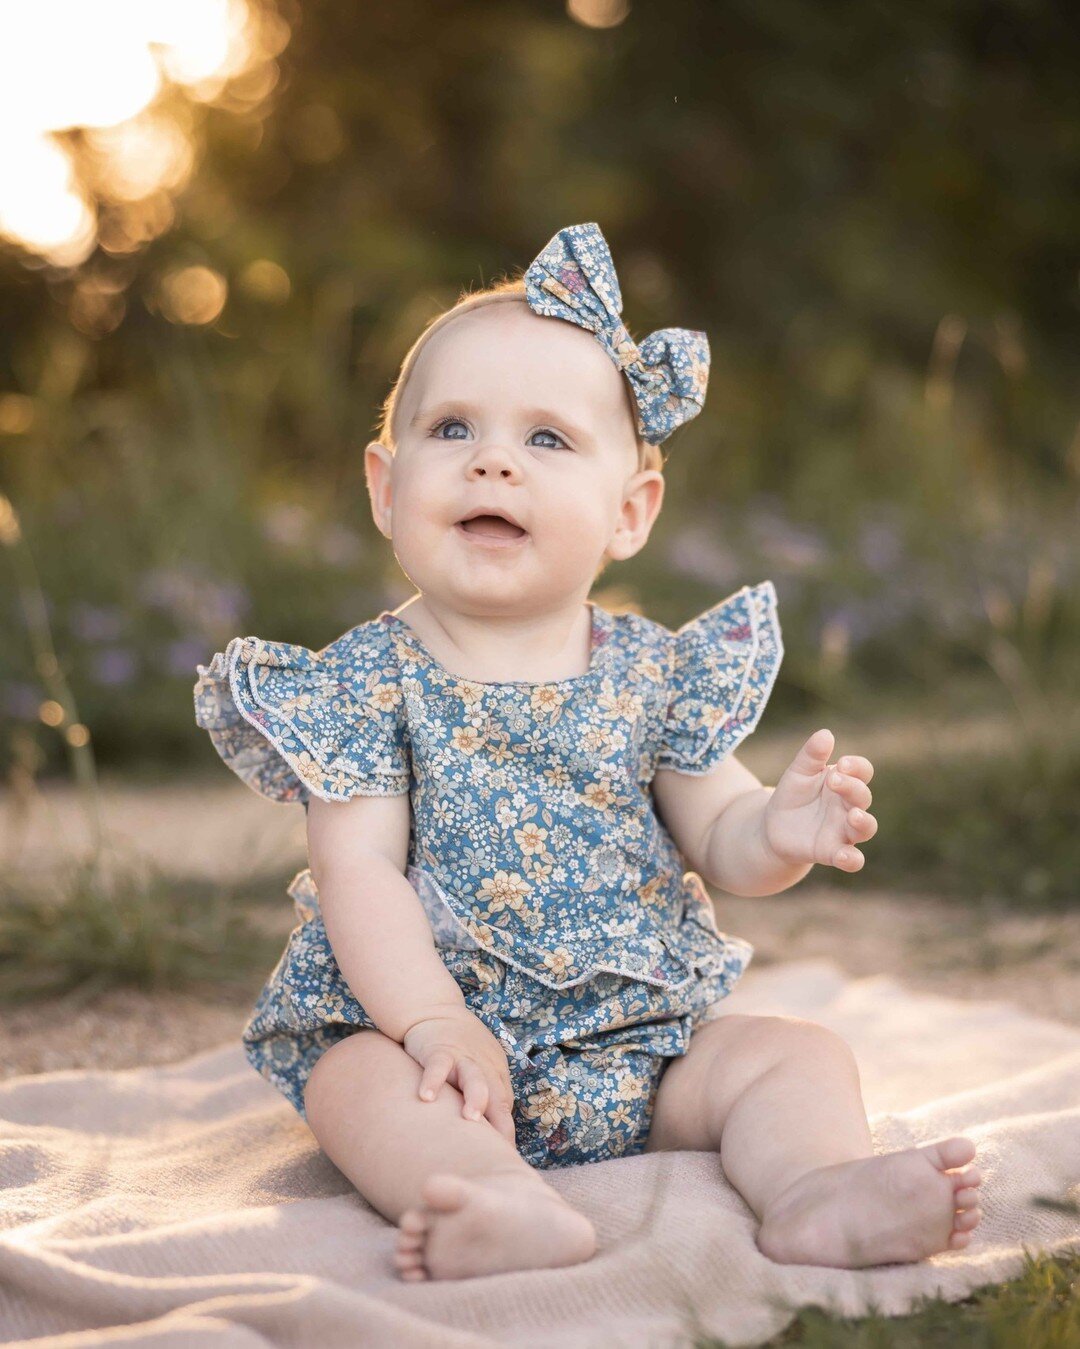 Gorgeous baby girl
This rainbow baby put on her smiles for a beautiful evening with her family watching the sunset. 

#gemclipsham_photography #madewithlightroom #centralwestlifestyle #clgsunset #gemclipsham_families #clickproelite #Honestly_GiveThan